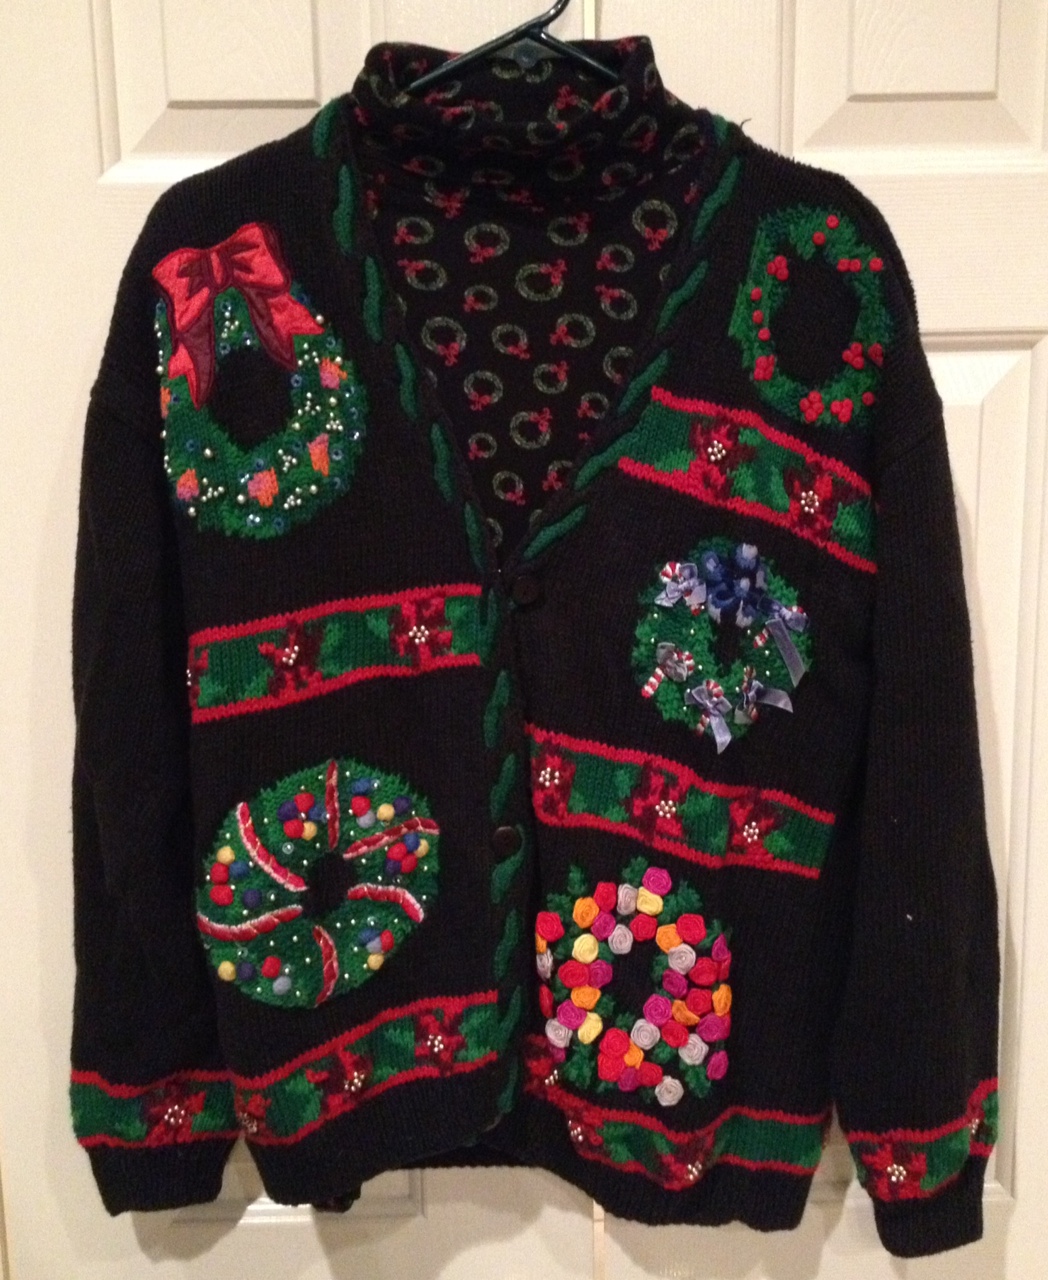 Ugly Christmas Sweater Party Ideas - Lake Travis Lifestyle -